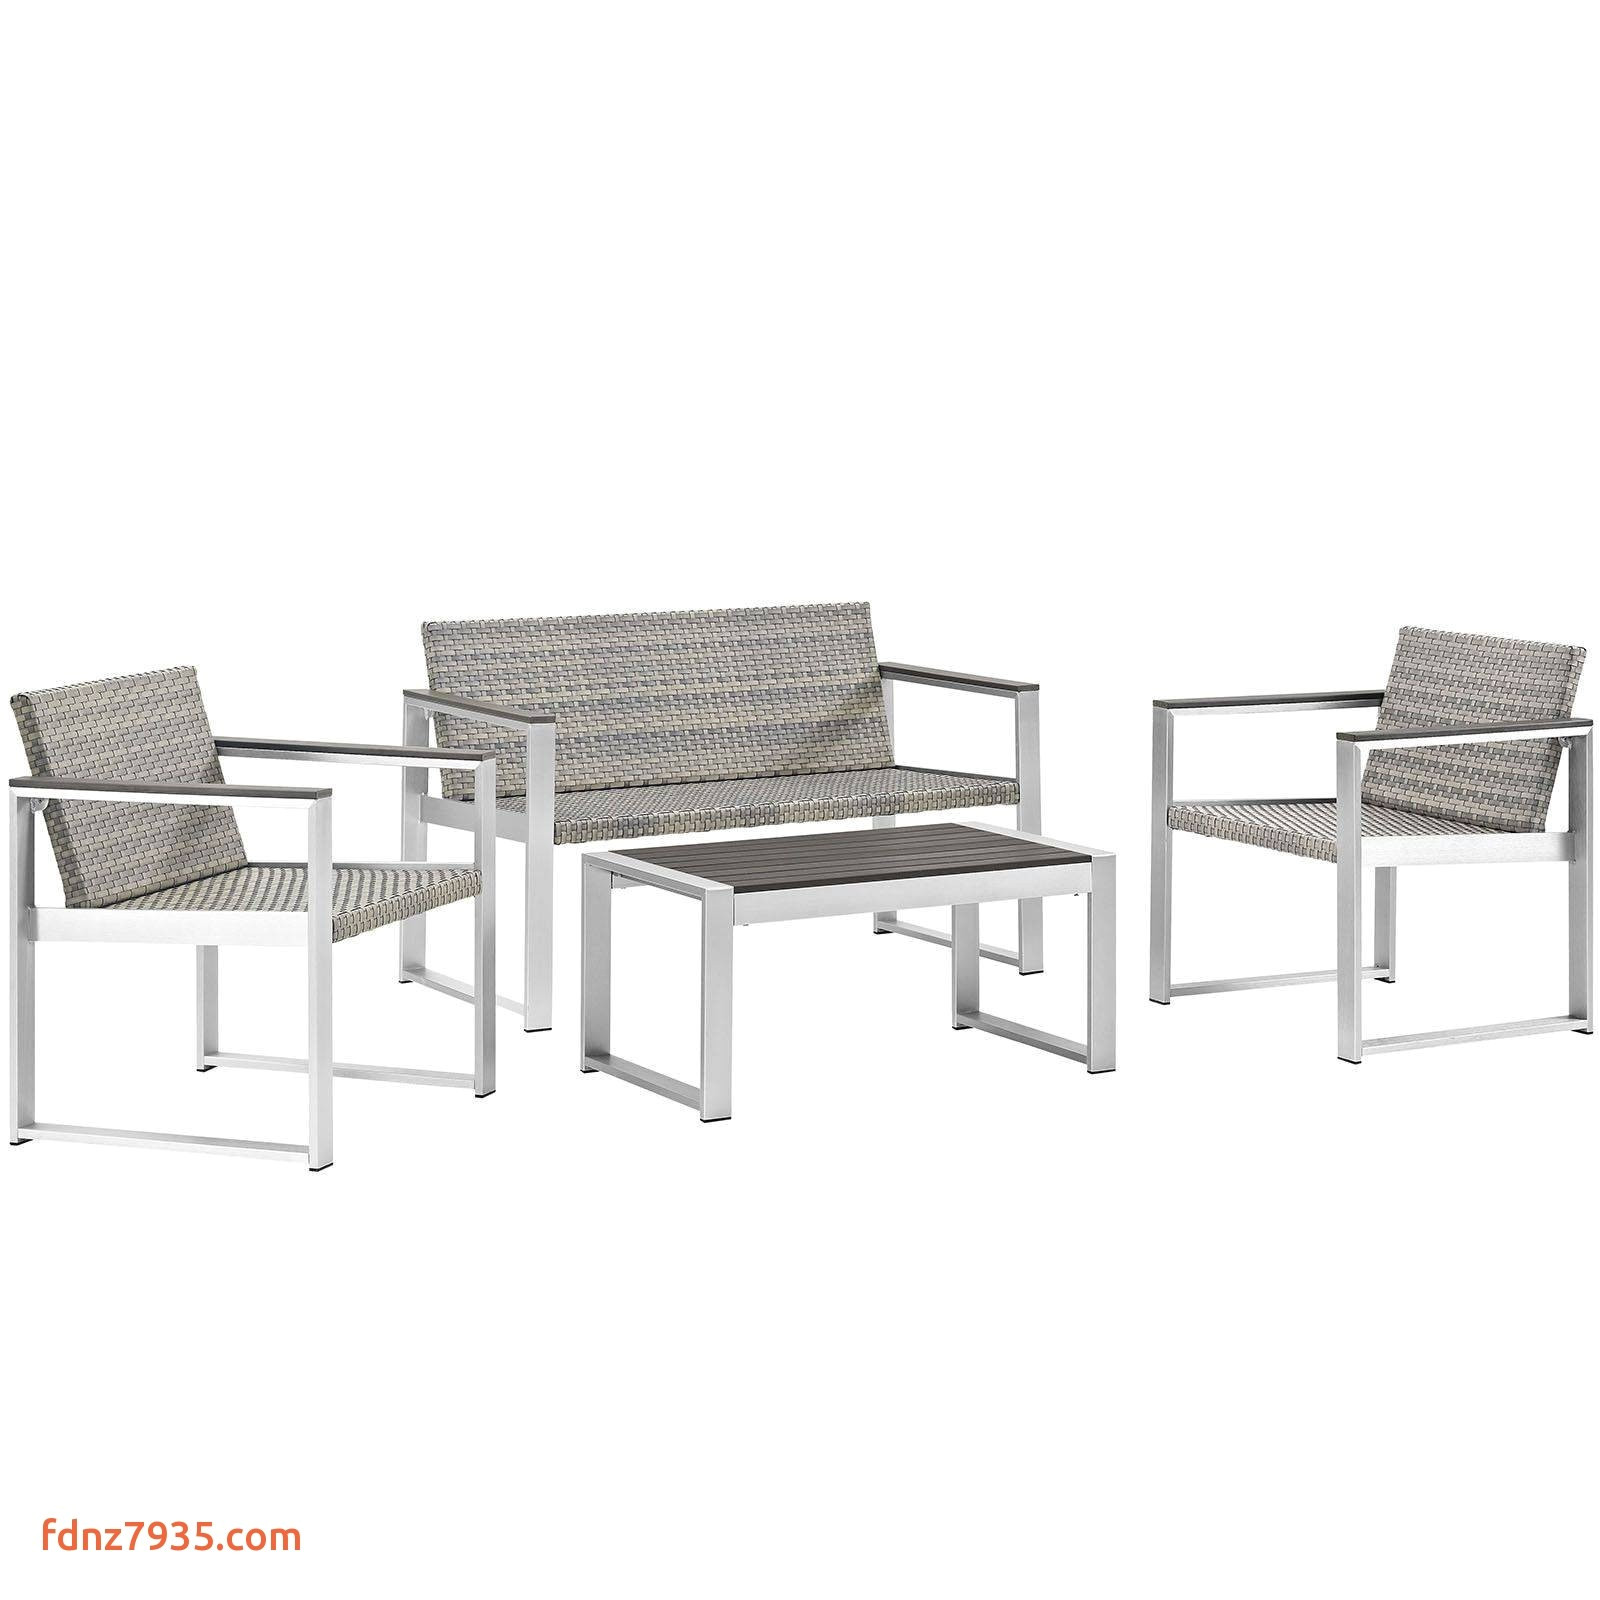 patio dining table lovely wicker outdoor sofa 0d patio chairs sale ideas small outdoor dining